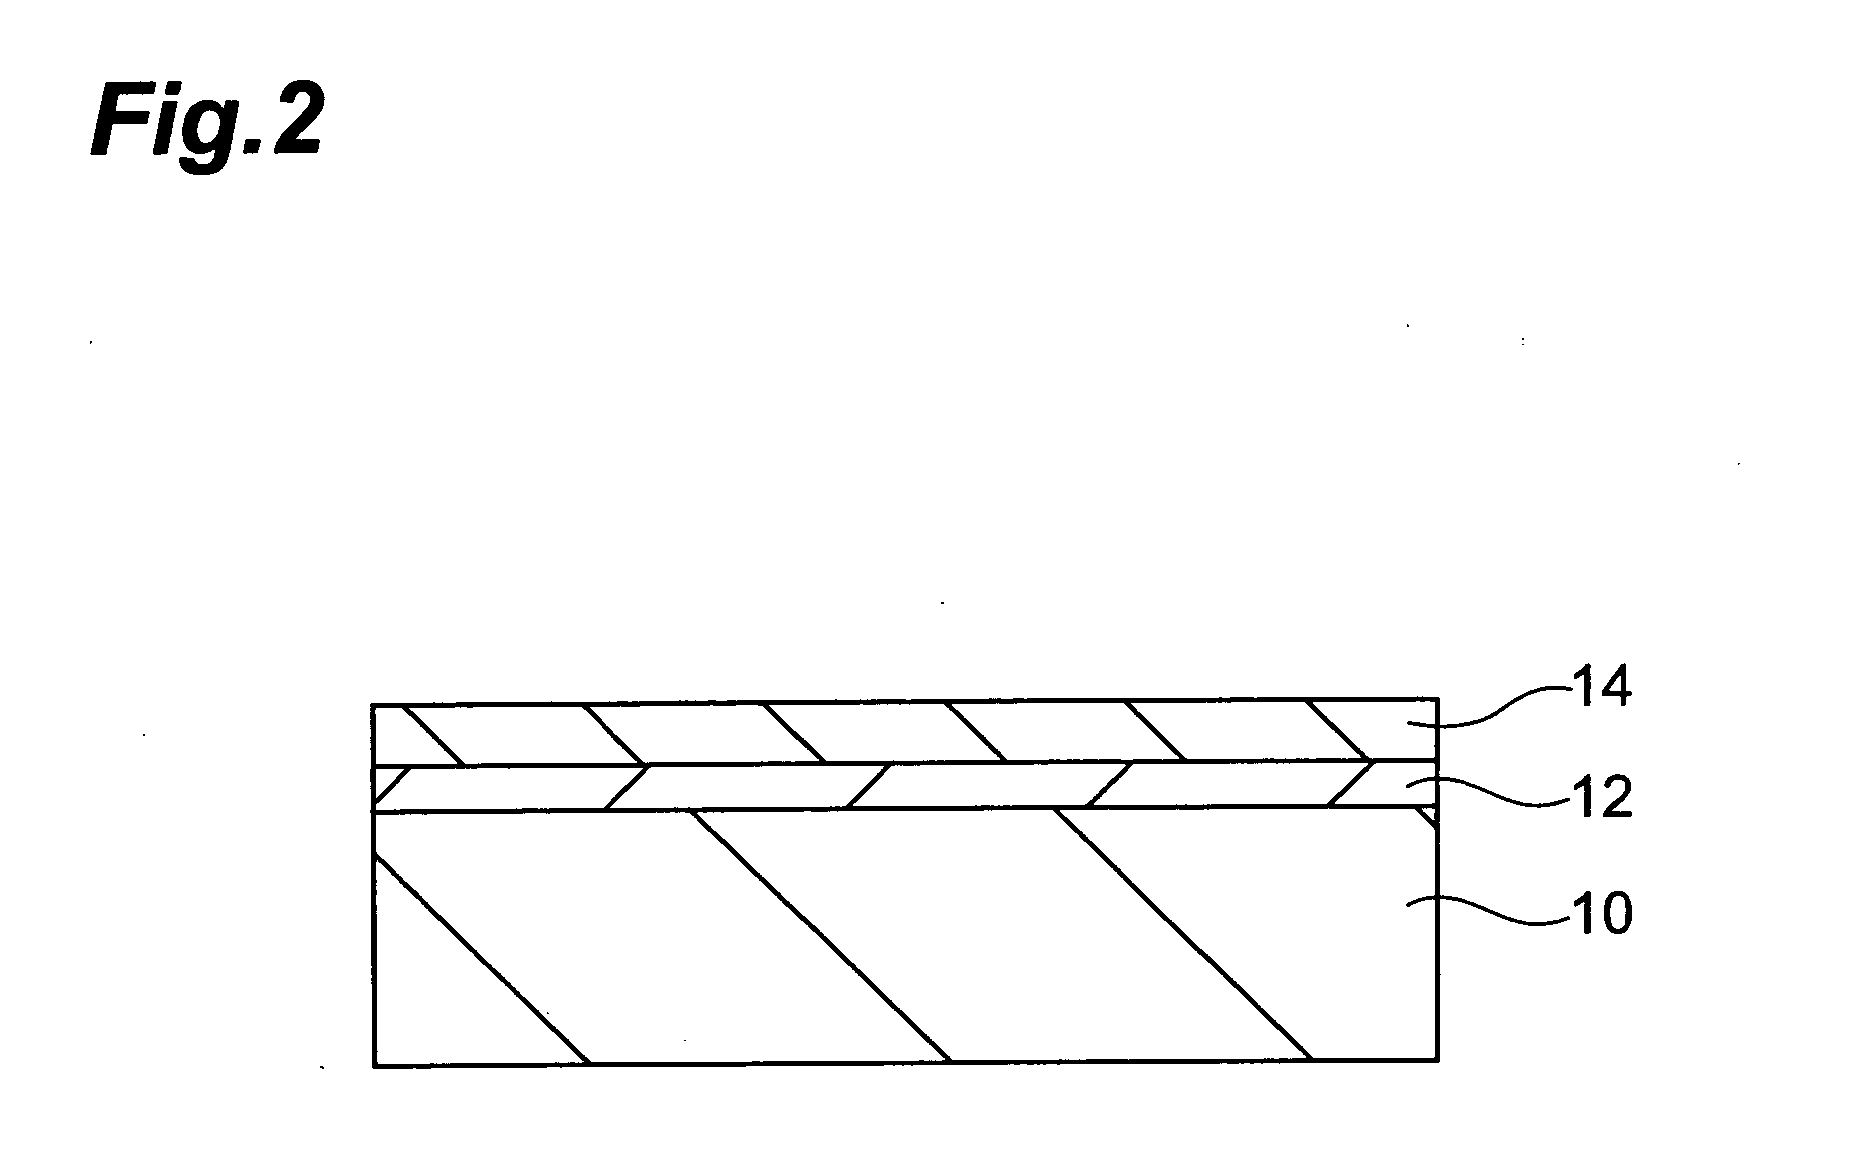 Light generating semiconductor device and method of making the same